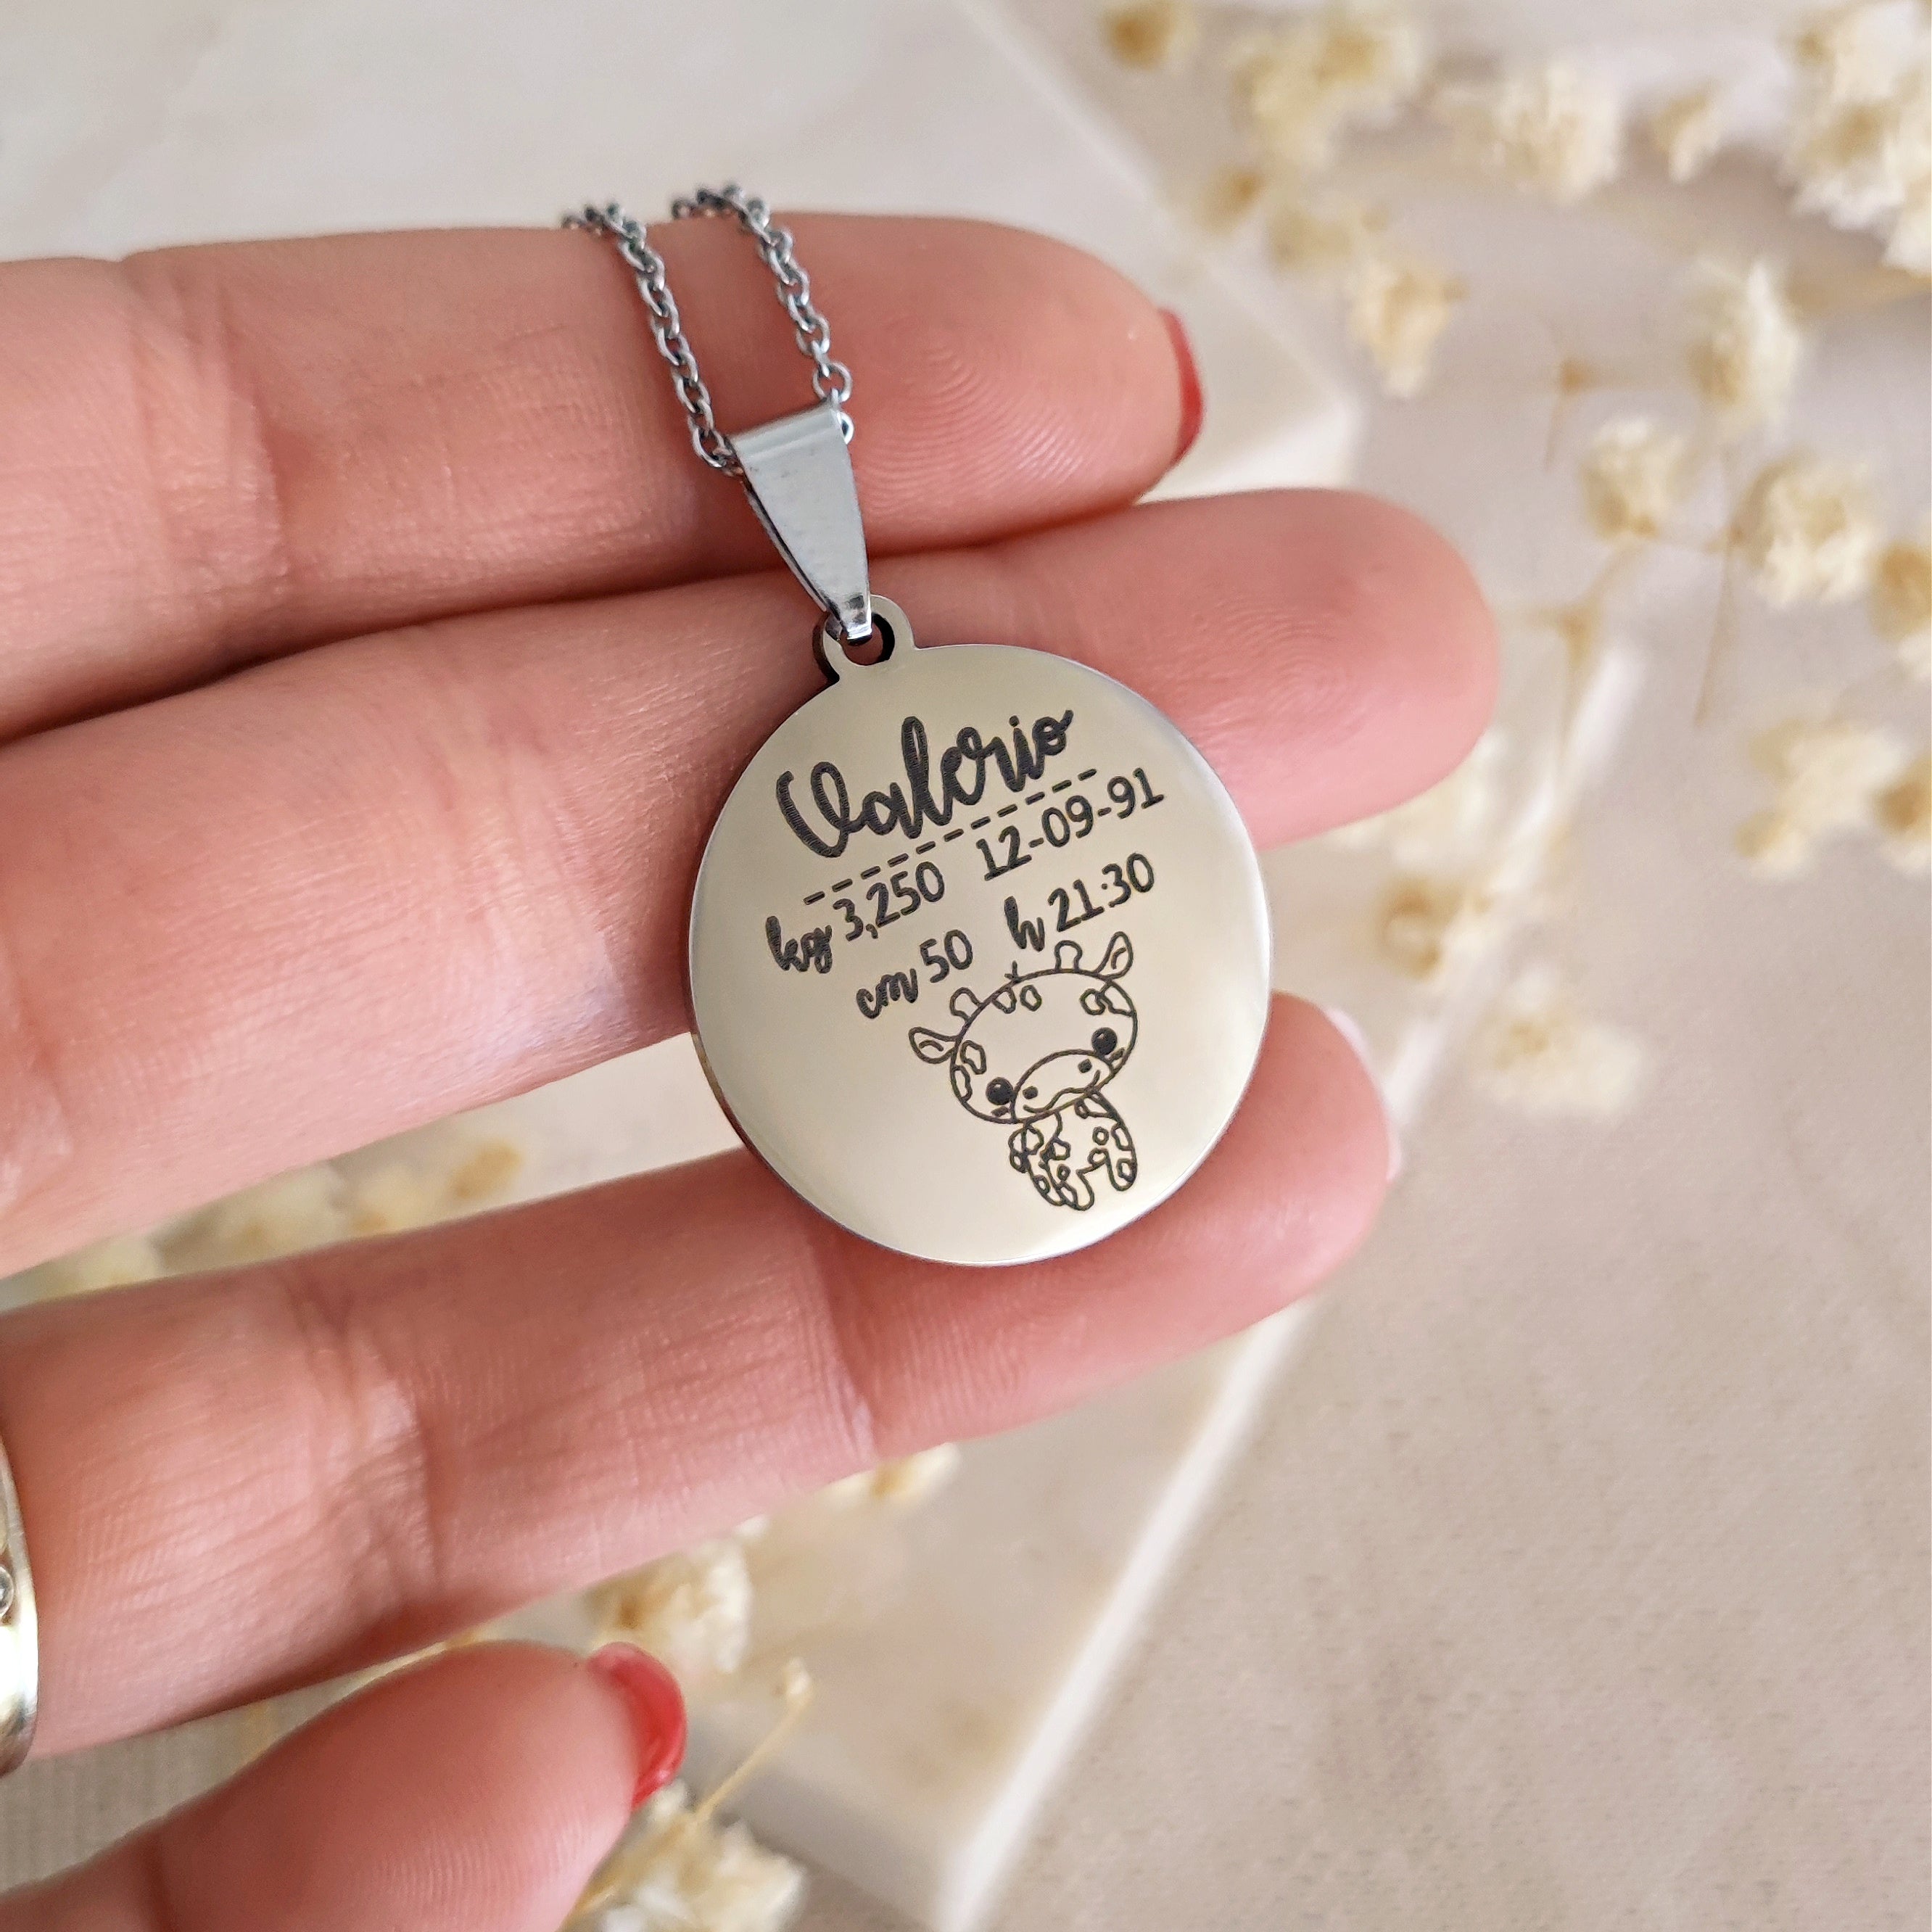 Personalised Silver and Solid Gold Bead Necklace | Lisa Angel